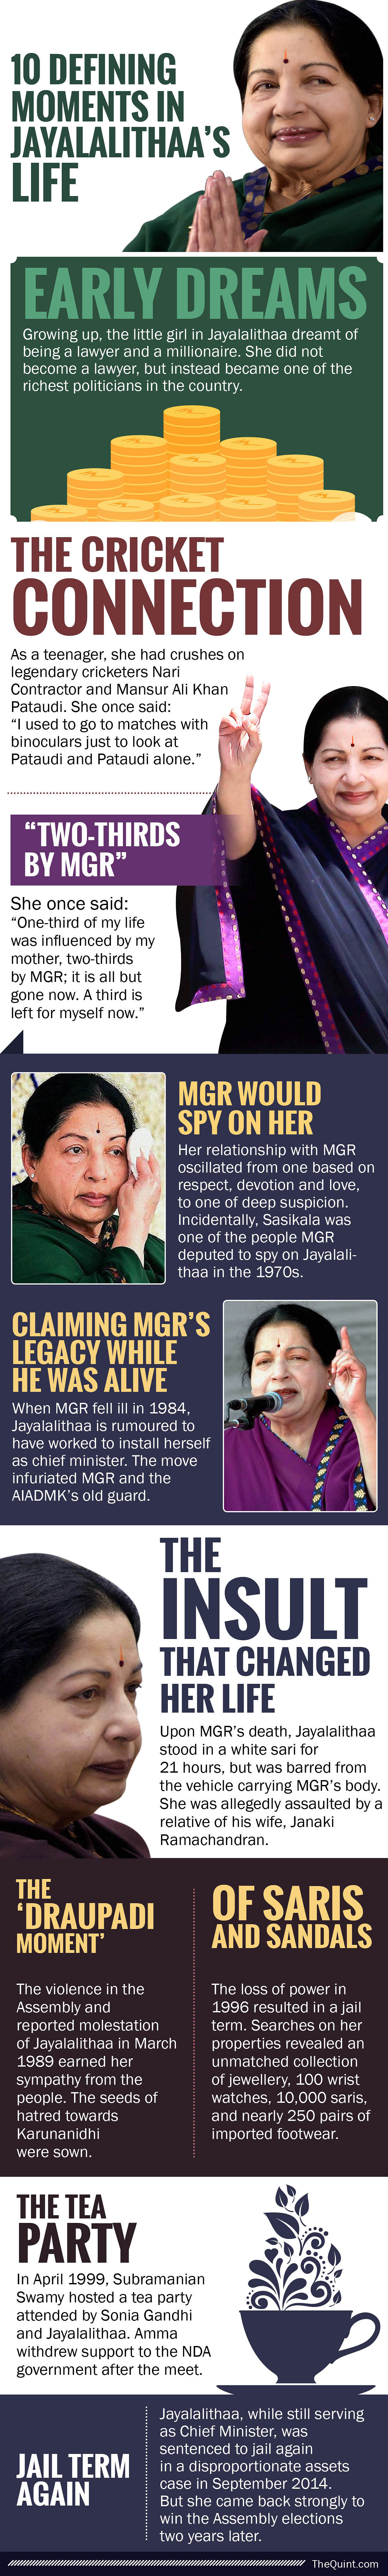 A look at the life of one of the most powerful politicians, Amma, who has weathered several highs and lows.